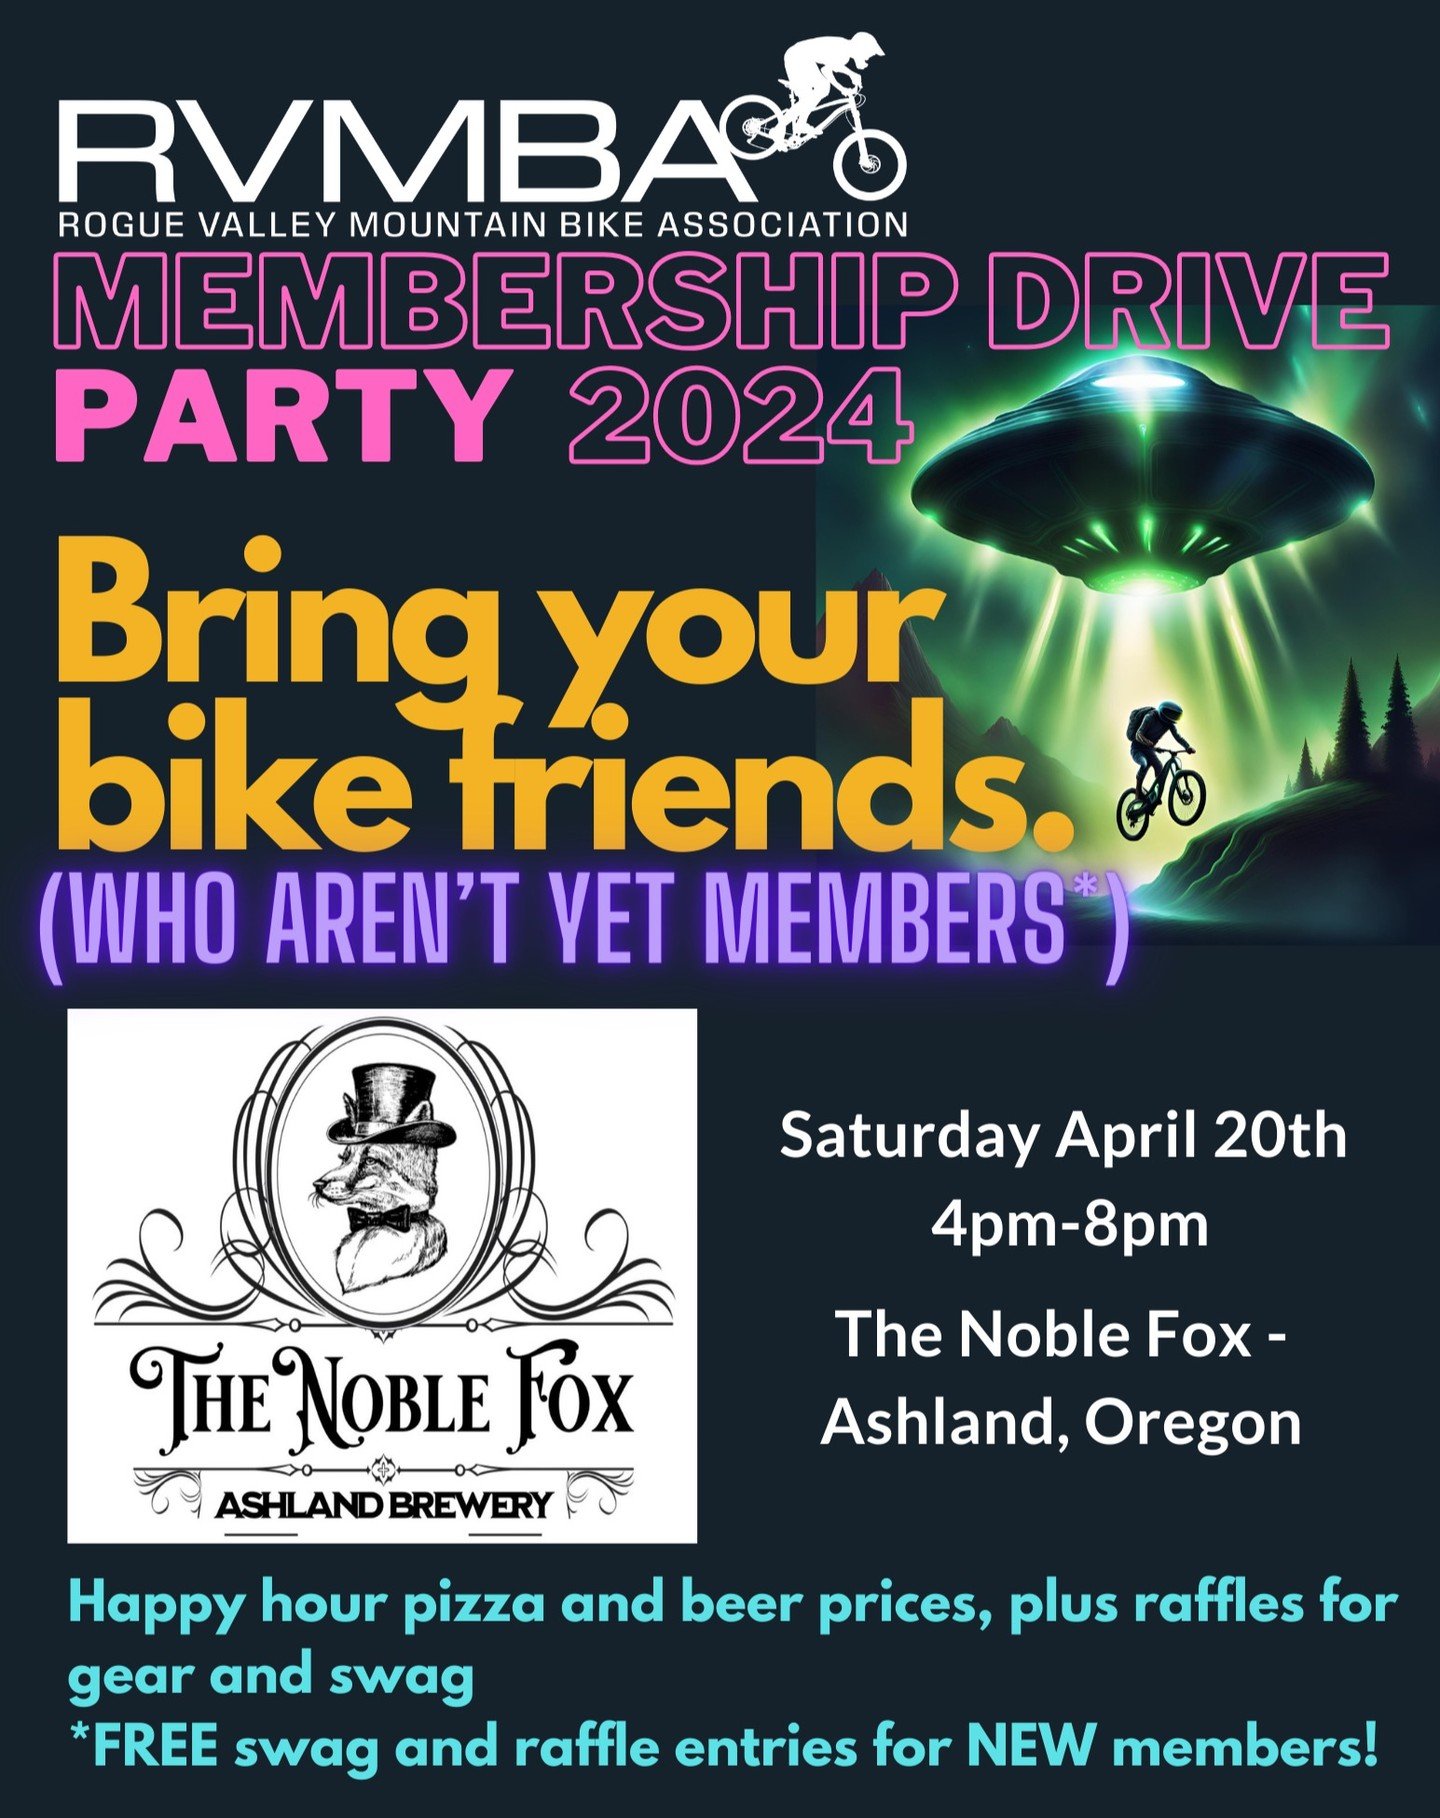 Did you hear? The best party of the year is coming to a brand new Ashland brewery, @thenoblefoxashland on Saturday, April 20 from 4-8pm. RVMBA is so excited to bring the mountain bike community together for the evening! There'll be a raffle as well a